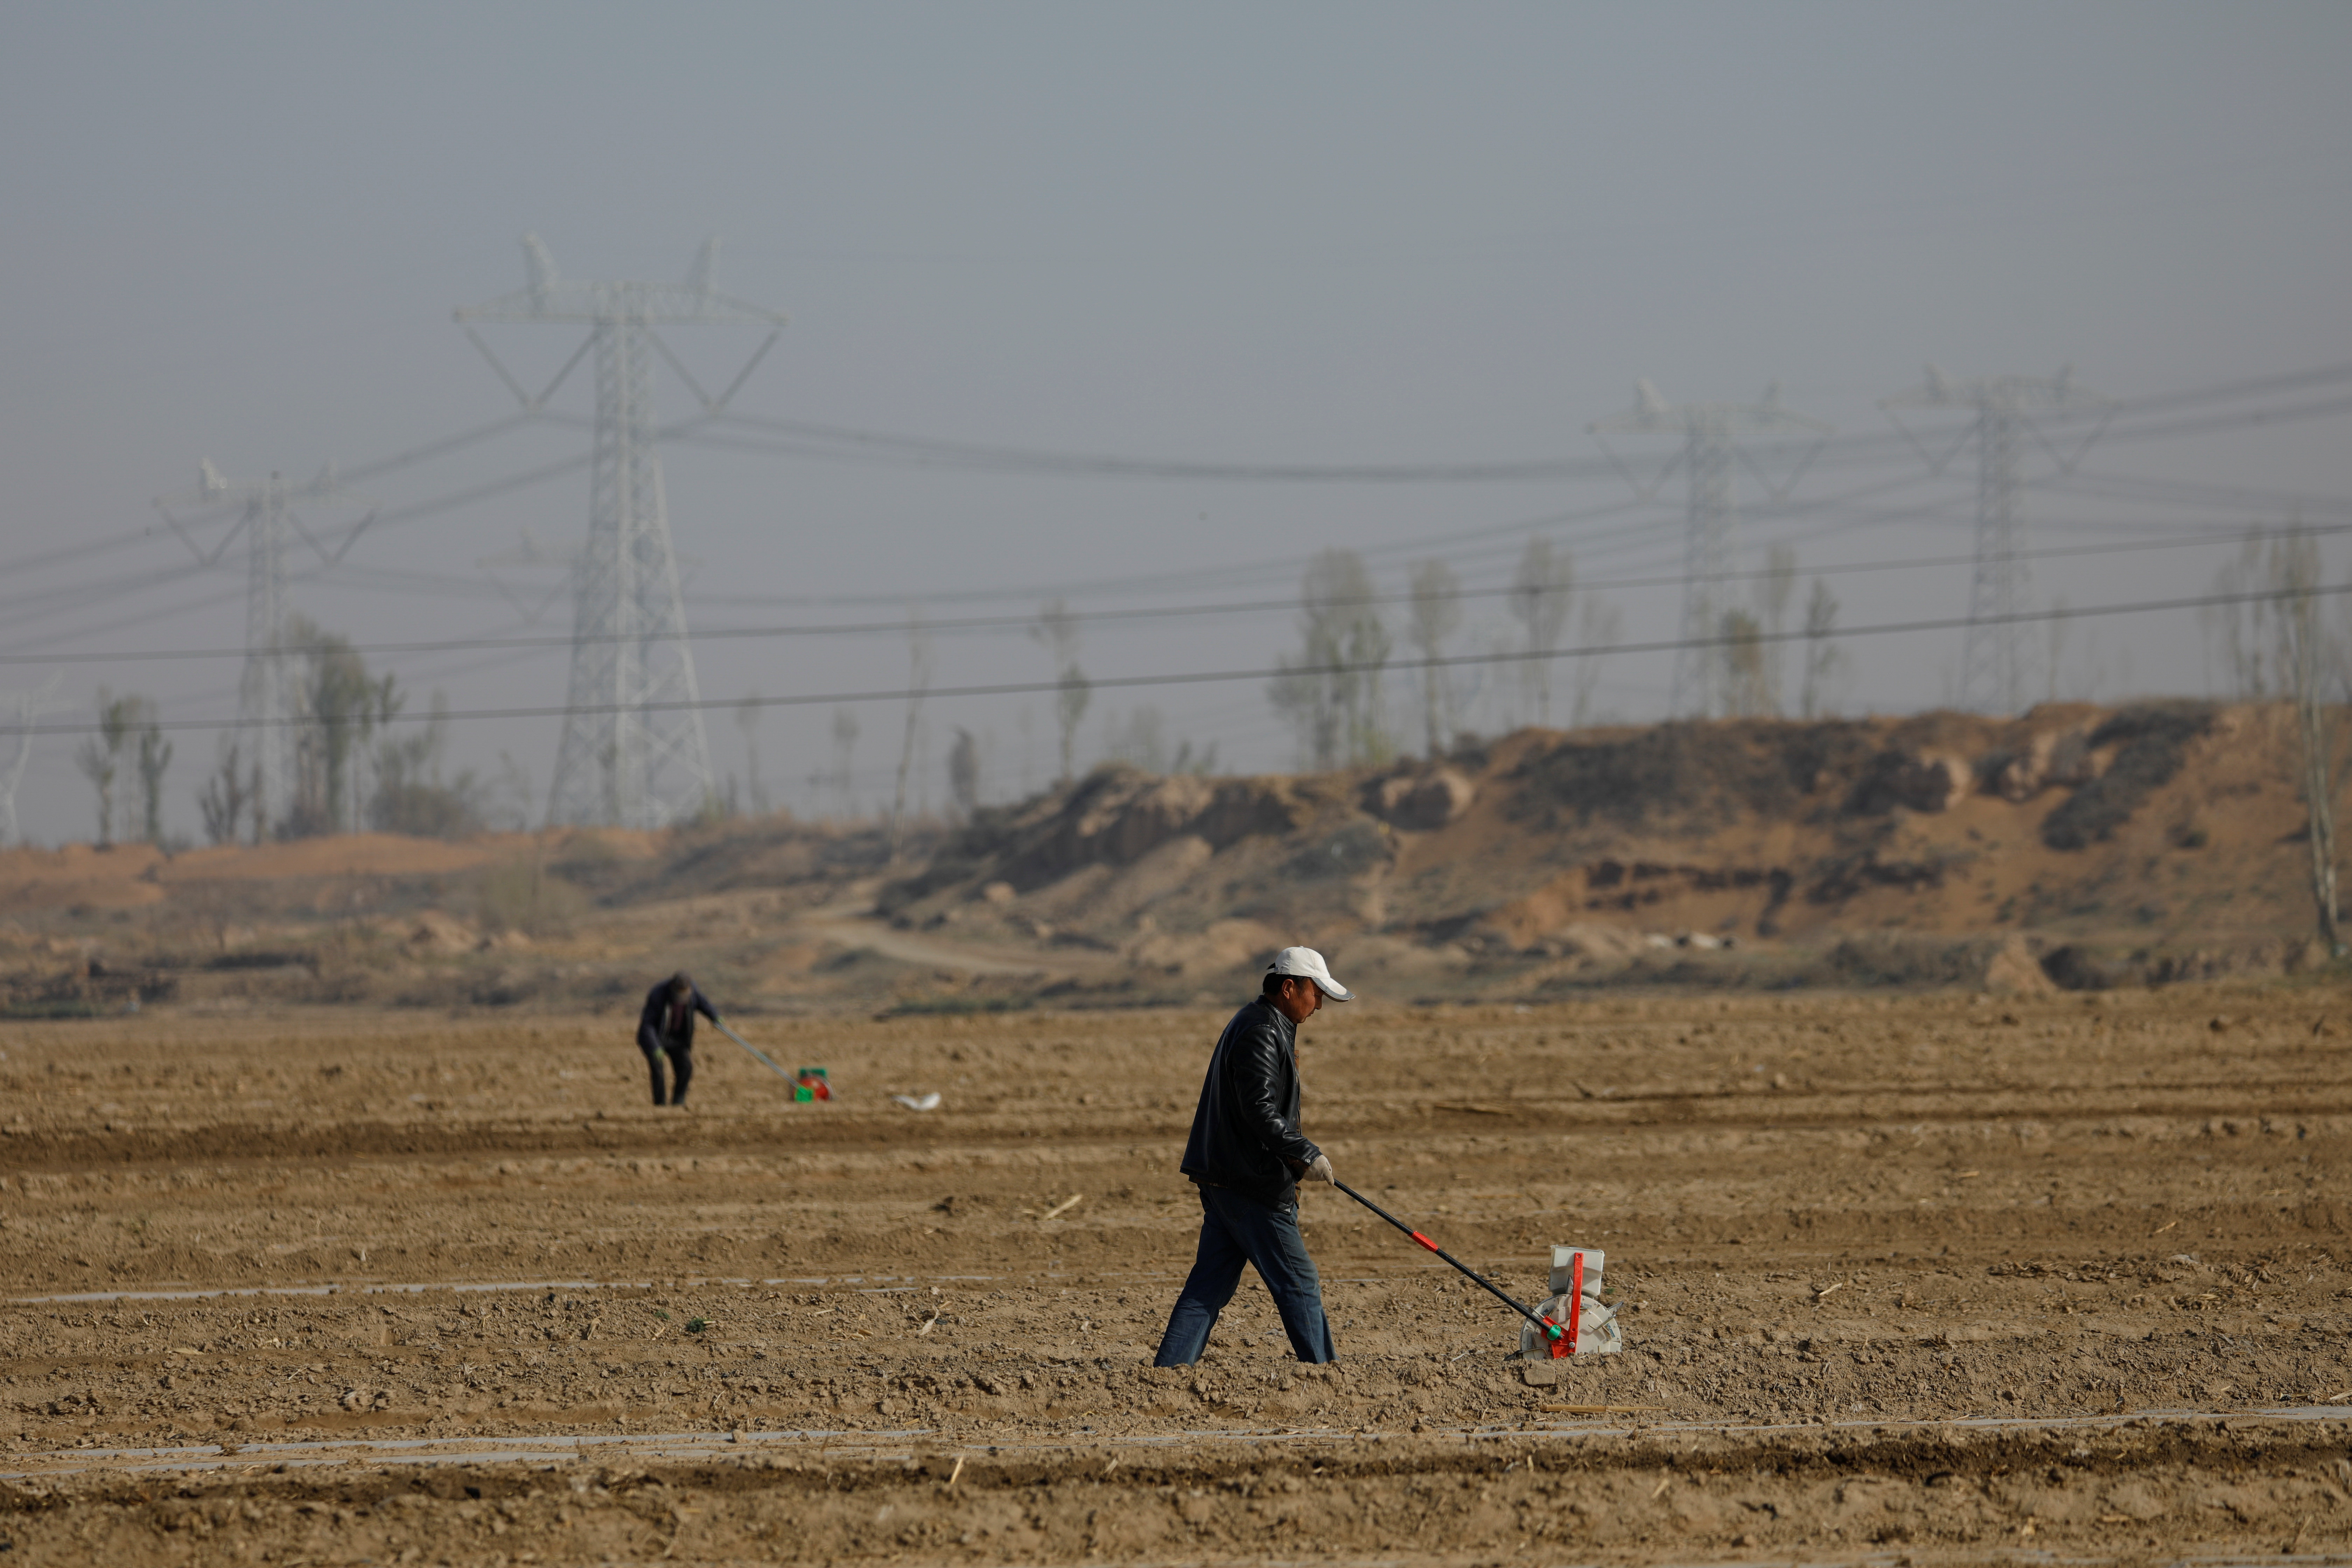 Workers use planters to plant corn seeds on the fields in a village on the outskirts of Wuwei